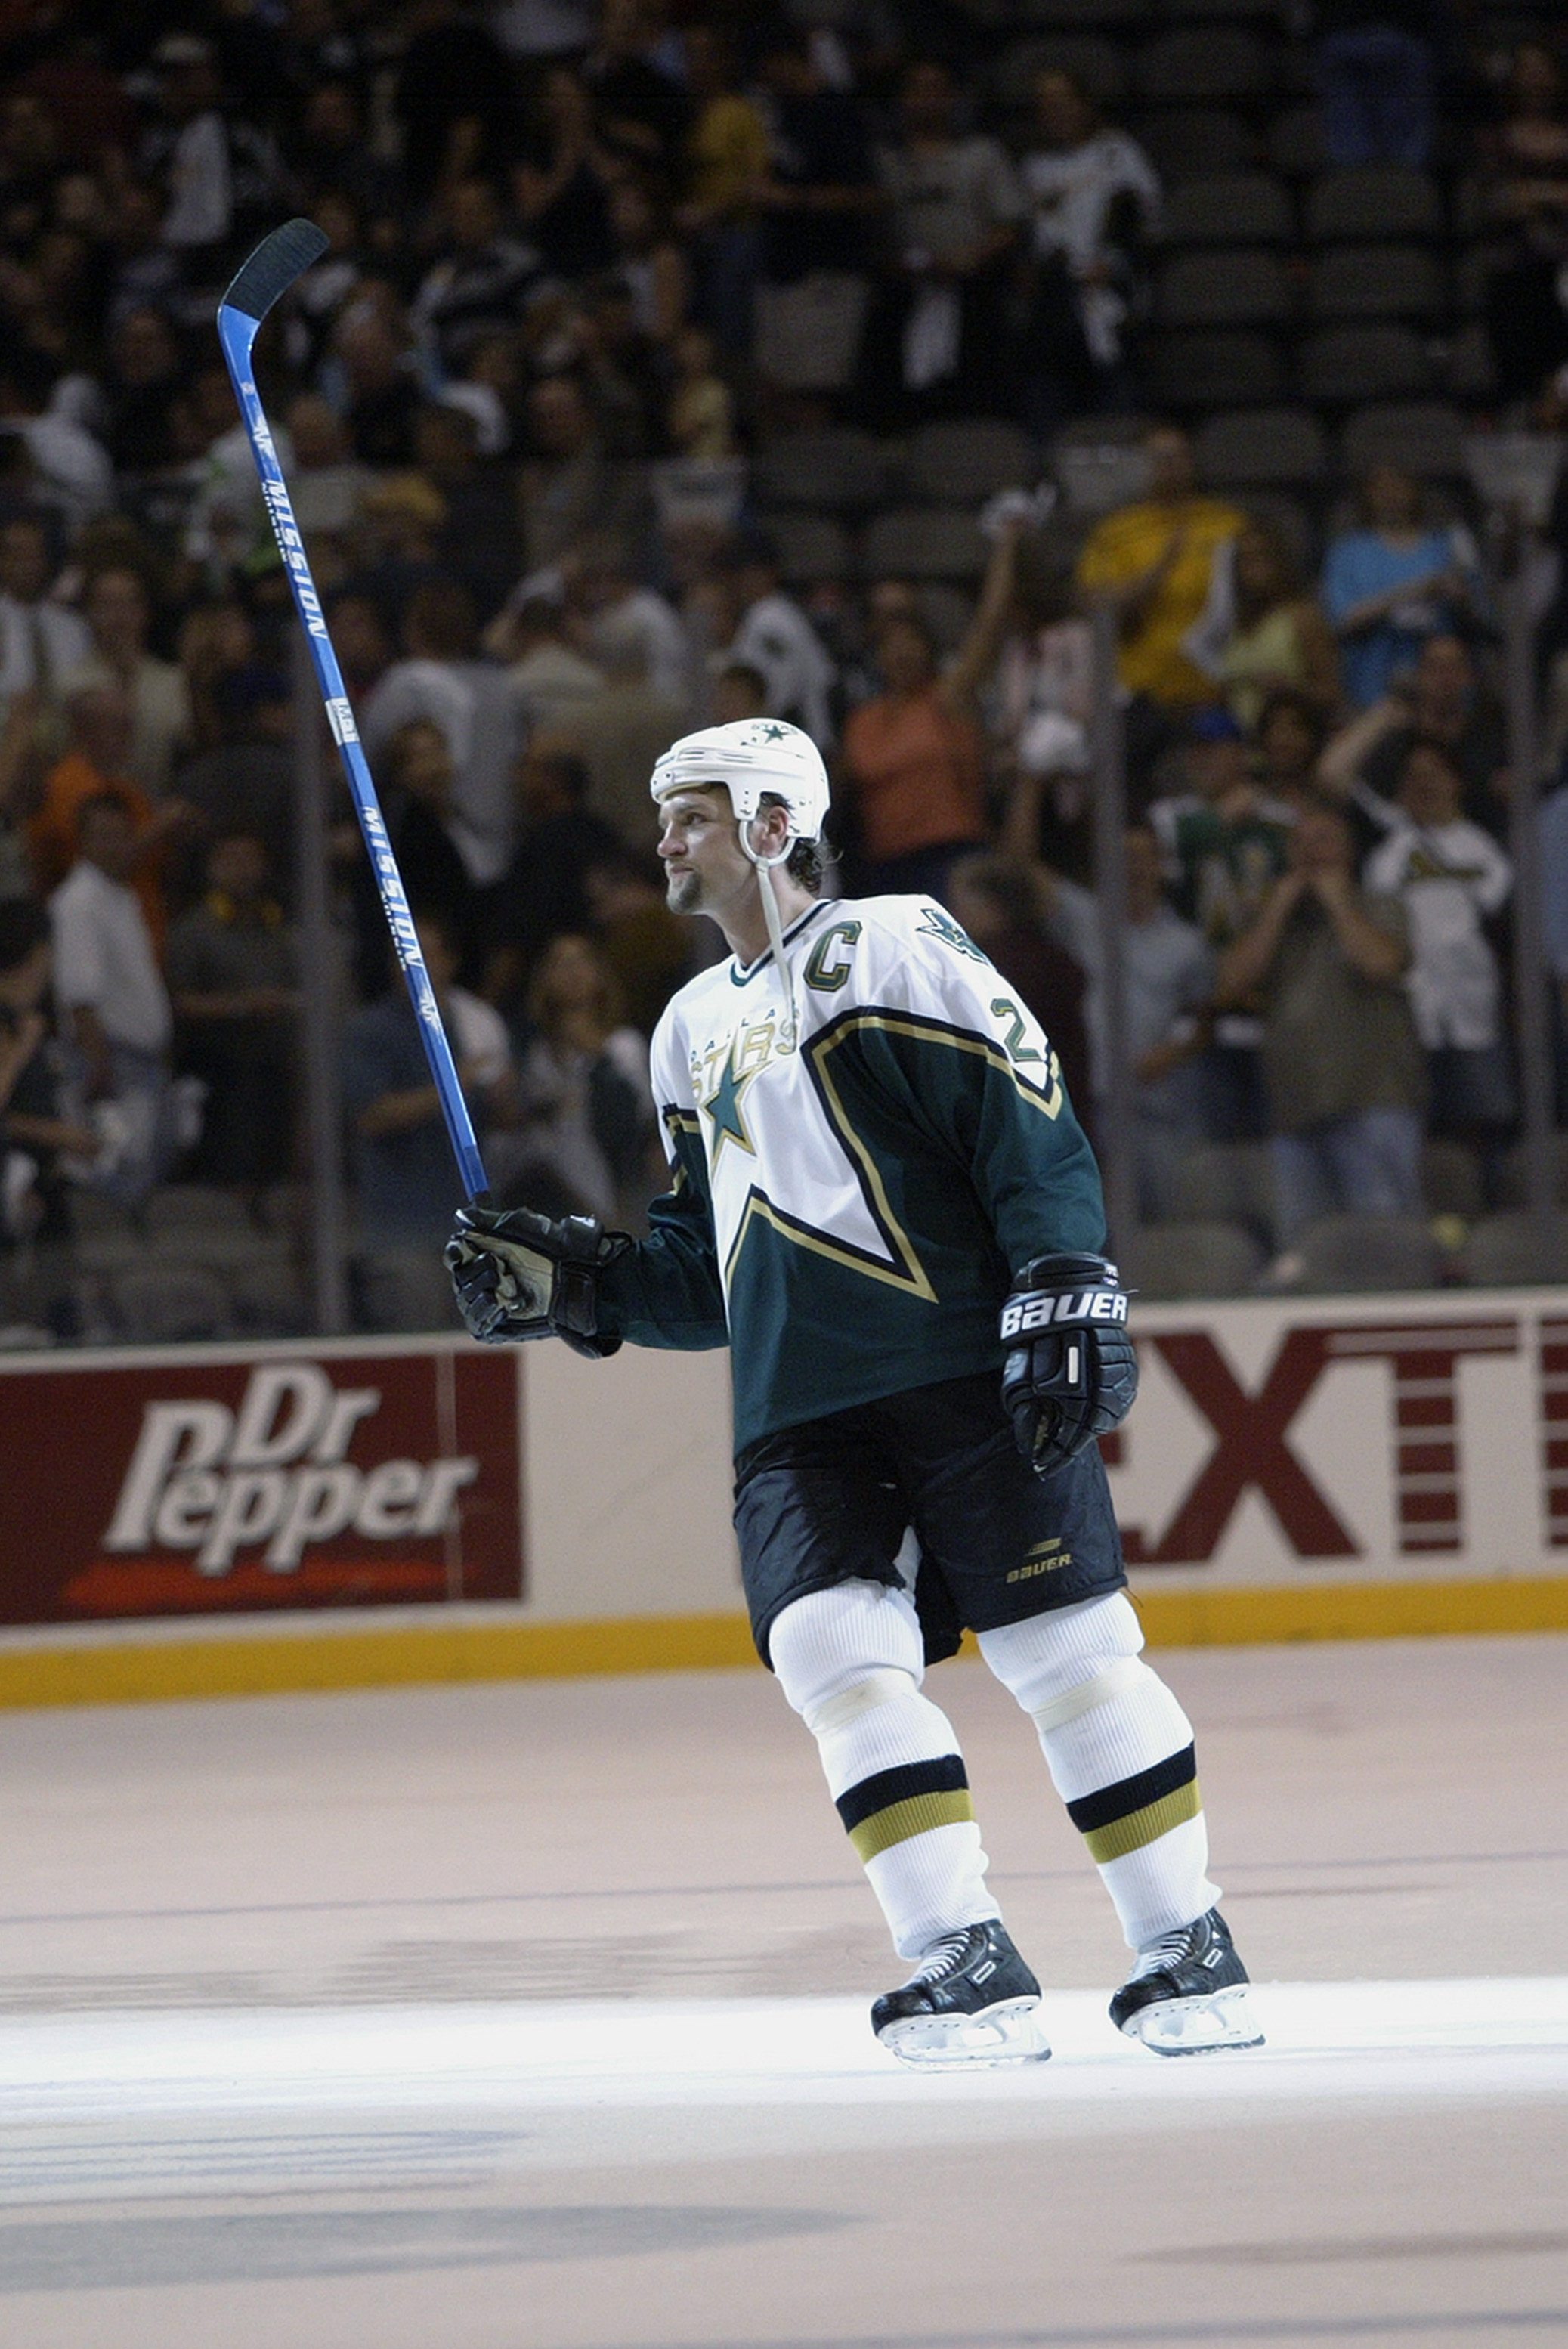 Ranking the top 10 Dallas Stars of the past two decades